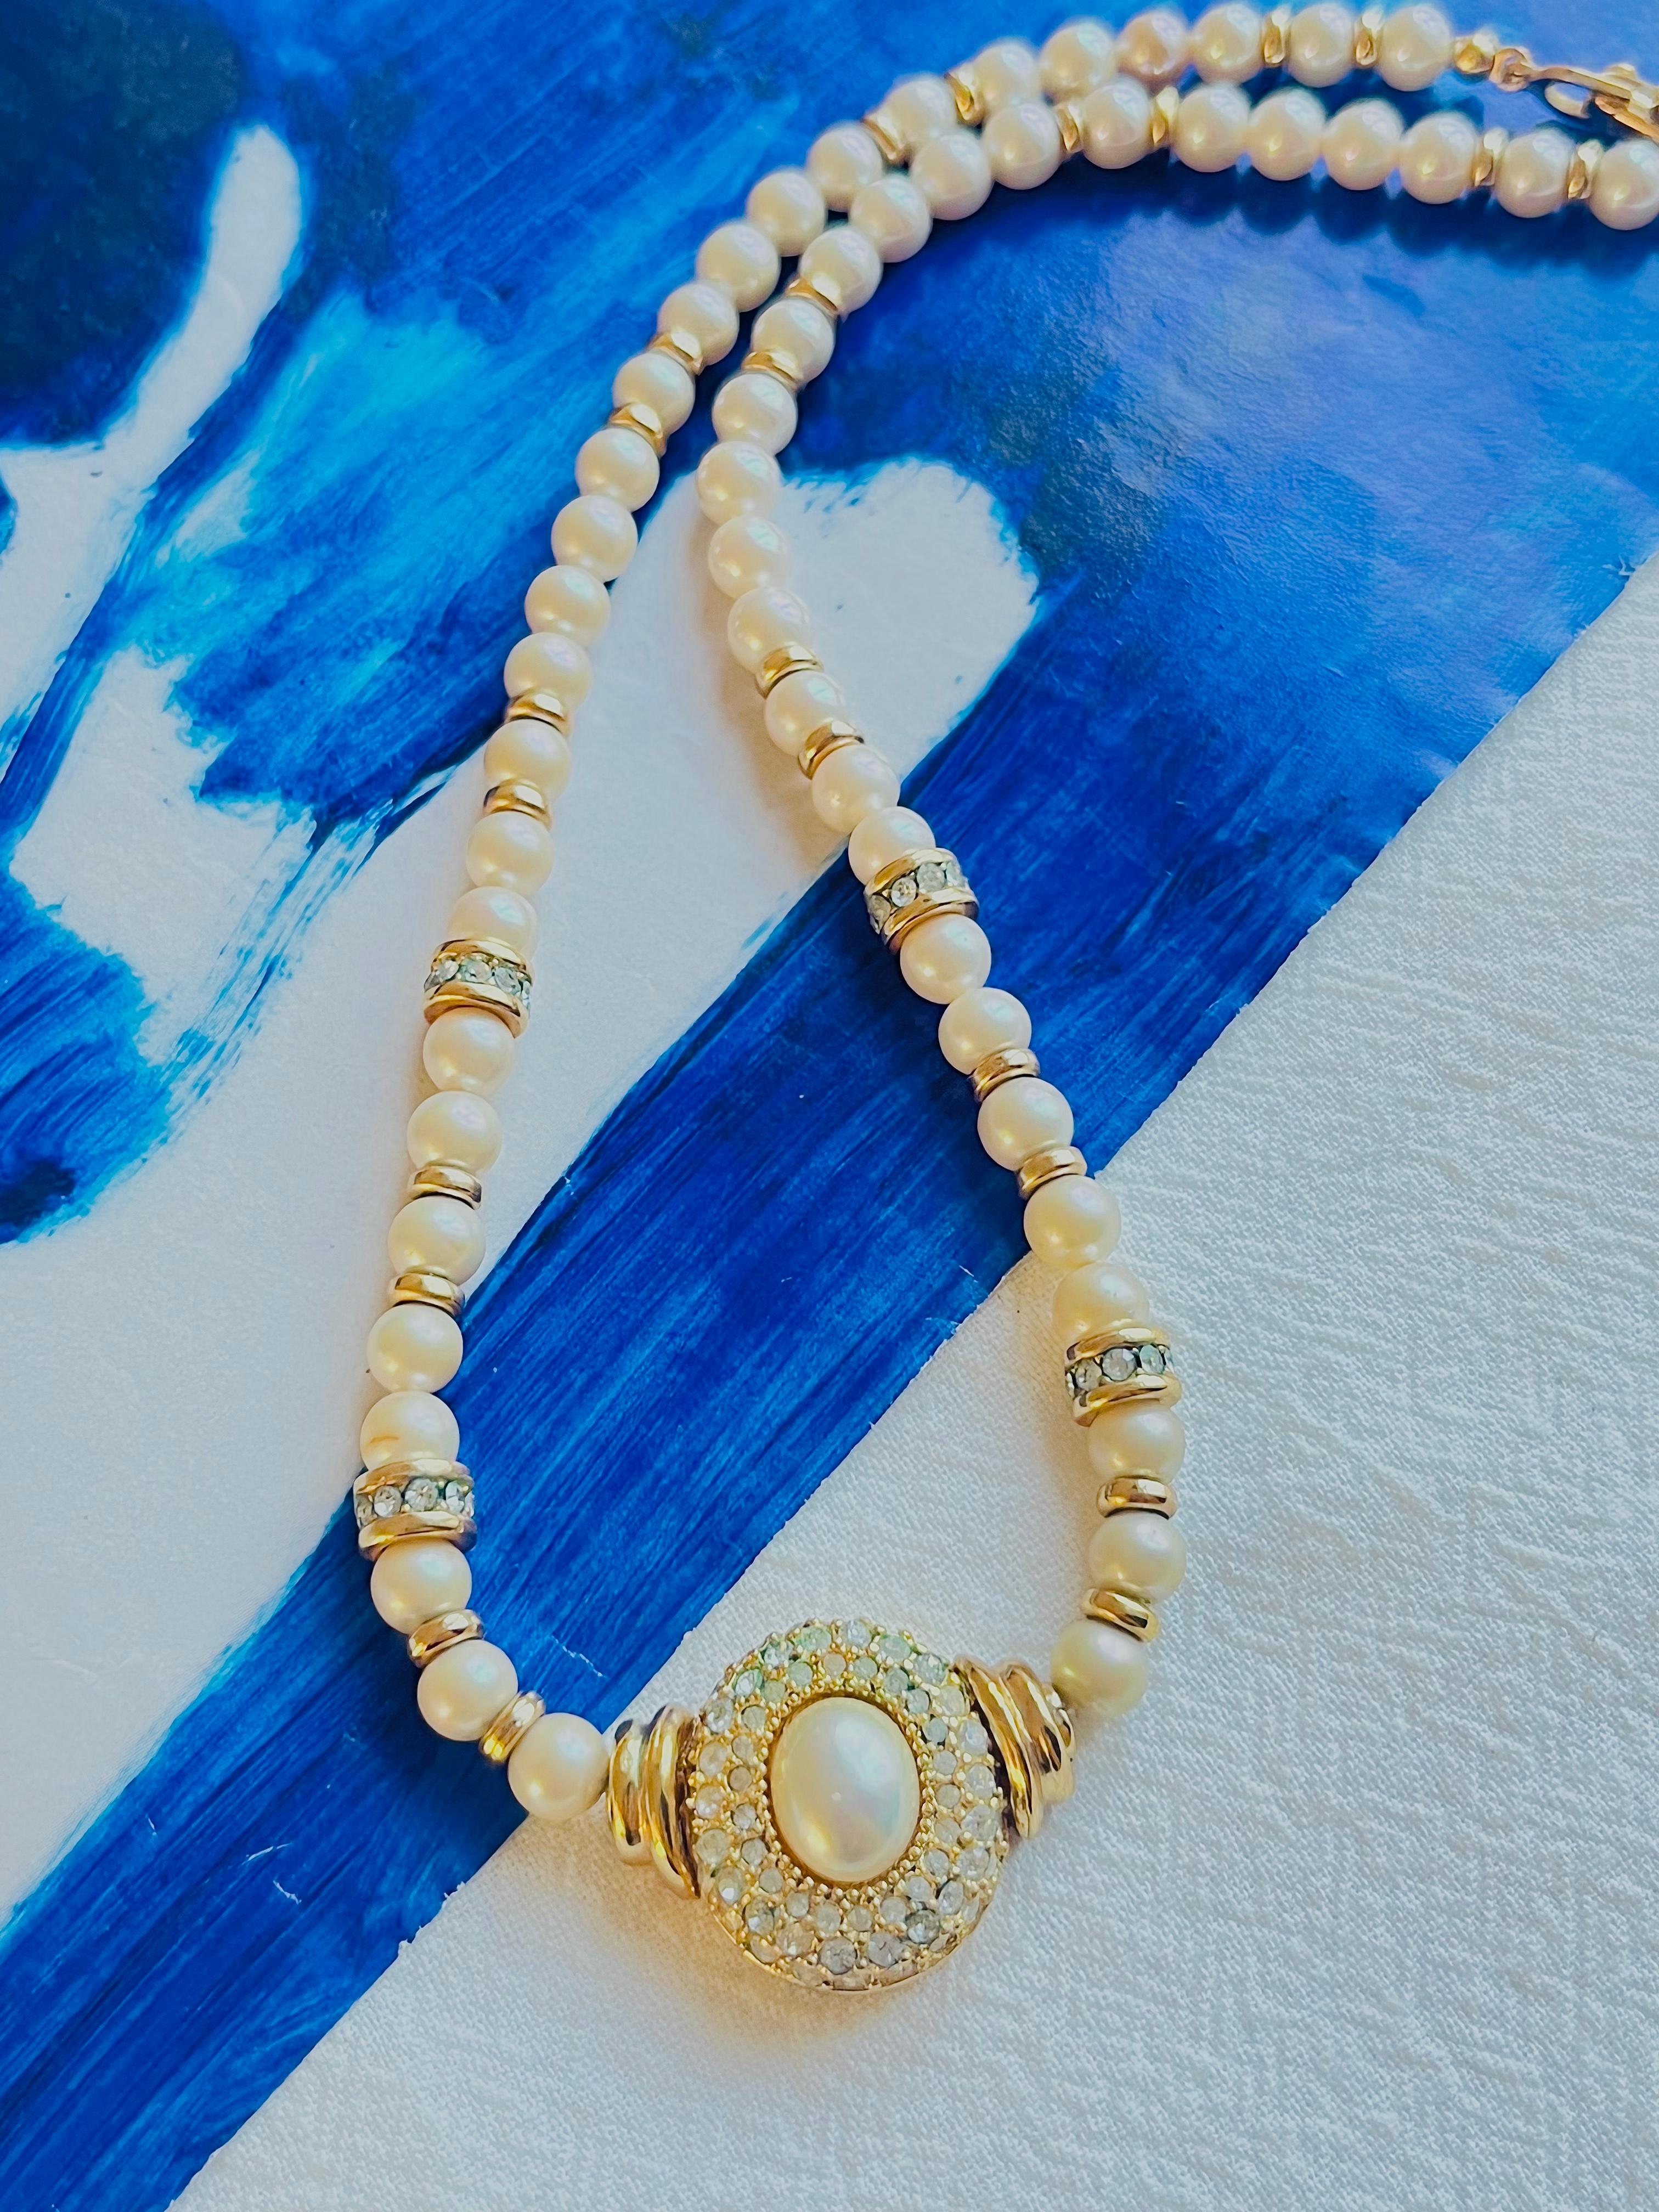 Christian Dior Vintage 1980s White Round Oval Pearl Crystals Pendant Necklace In Excellent Condition For Sale In Wokingham, England